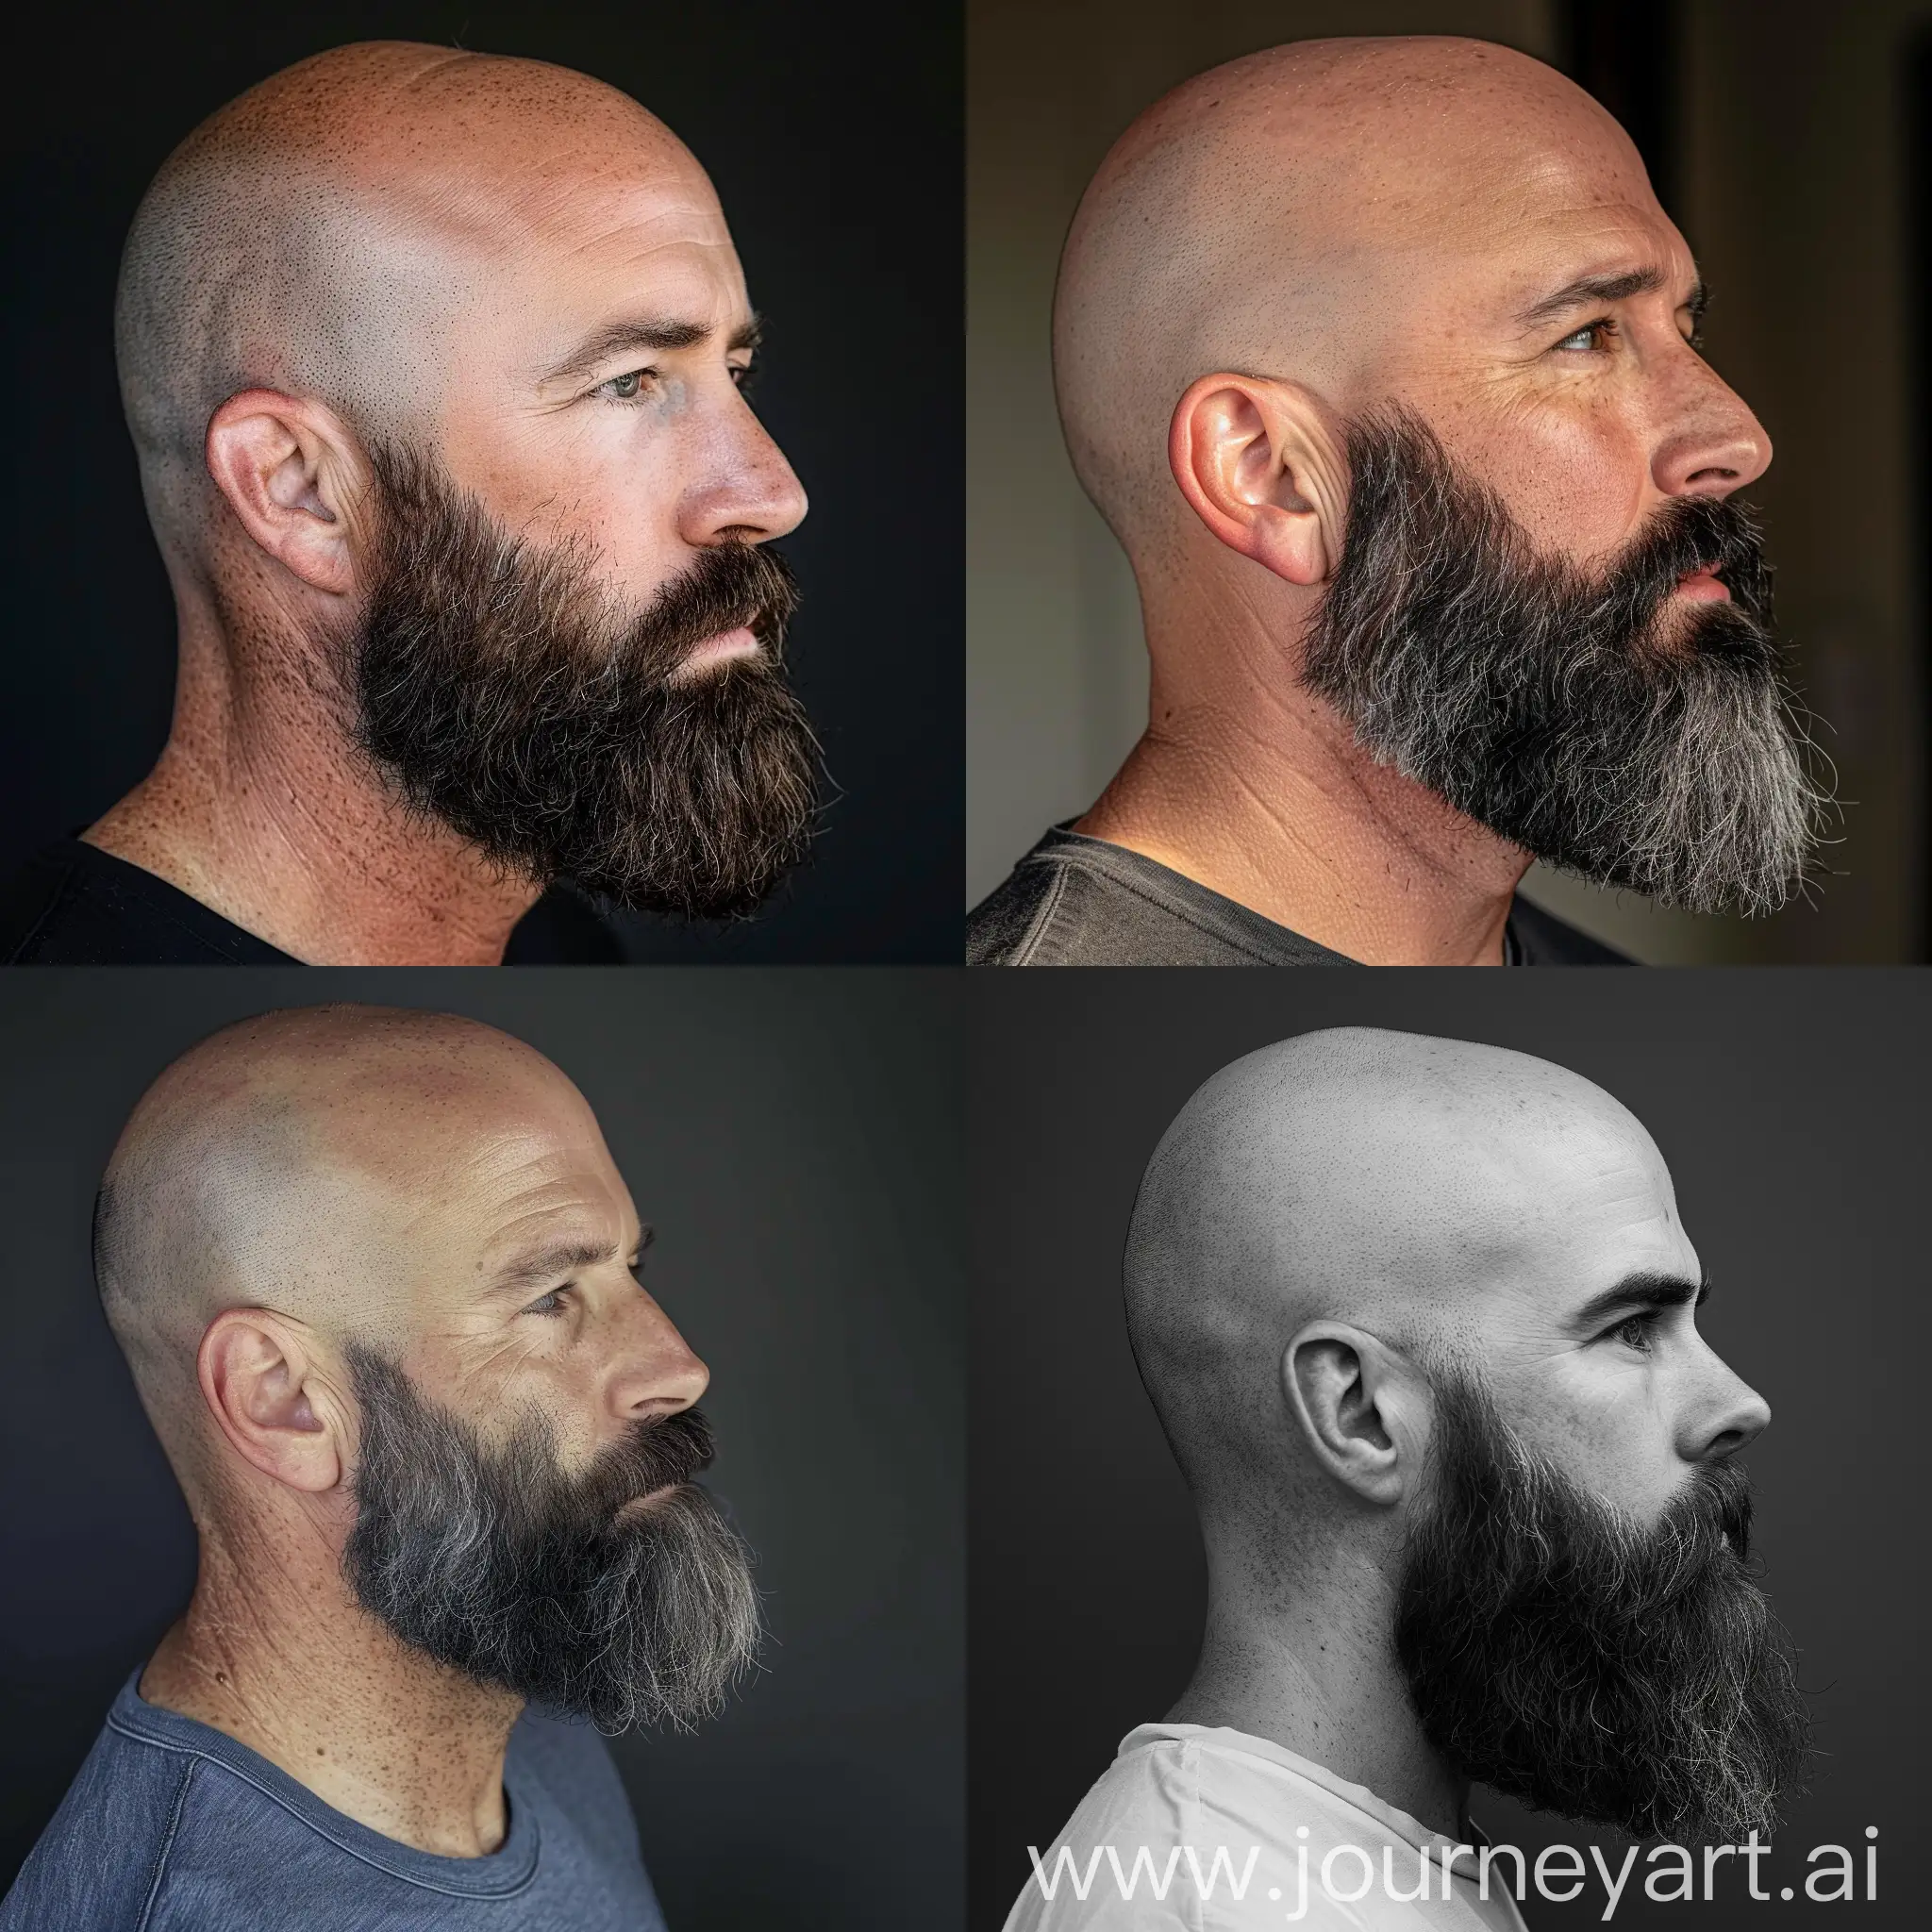 Mature-Bald-Man-with-Daddy-Look-and-Dark-Beard-Portrait